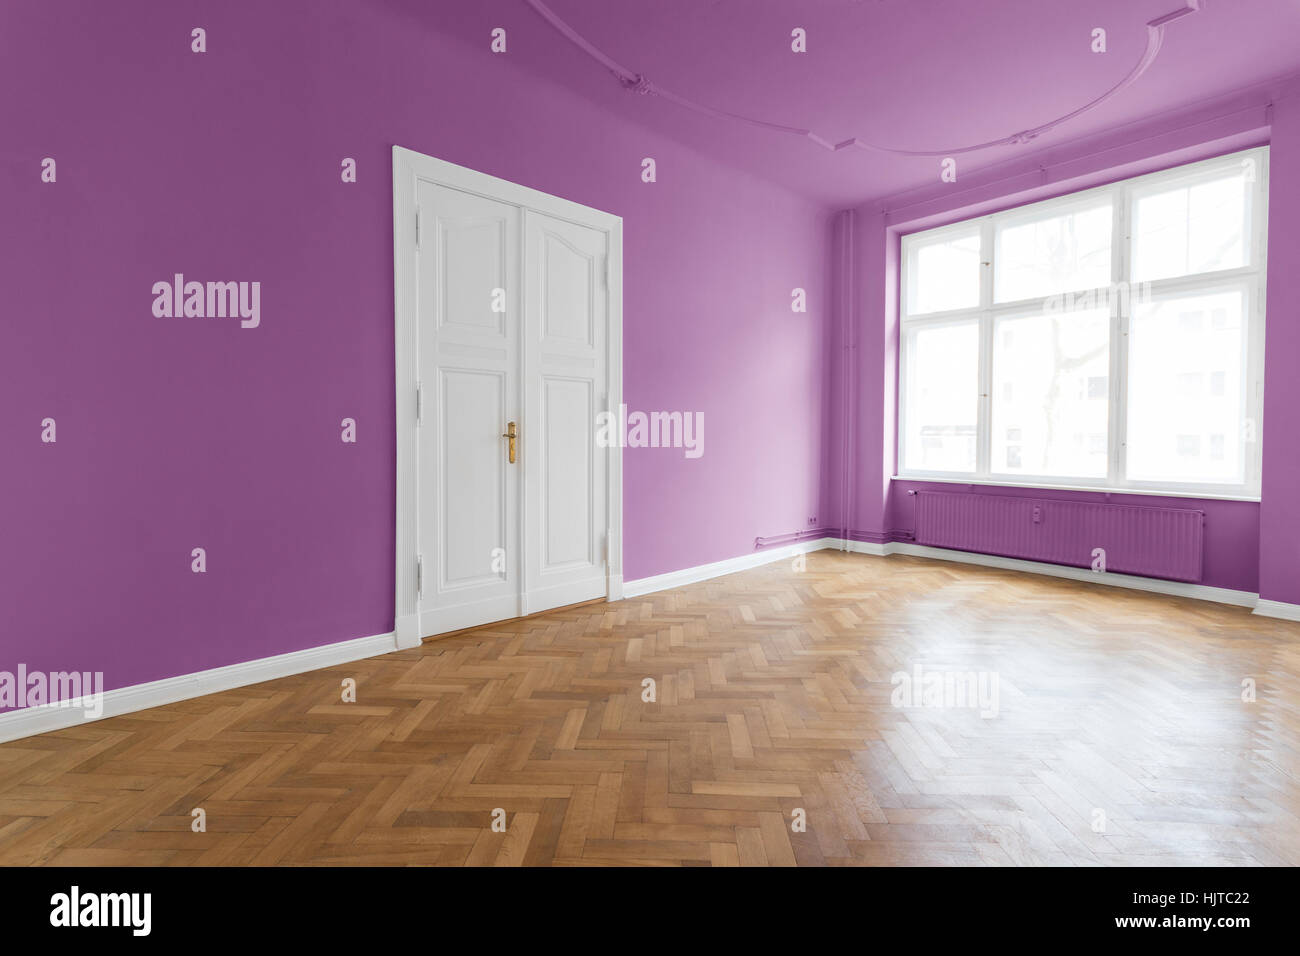 violet walls, pink room with wooden parquet floor - empty apartment room in   restored old building Stock Photo